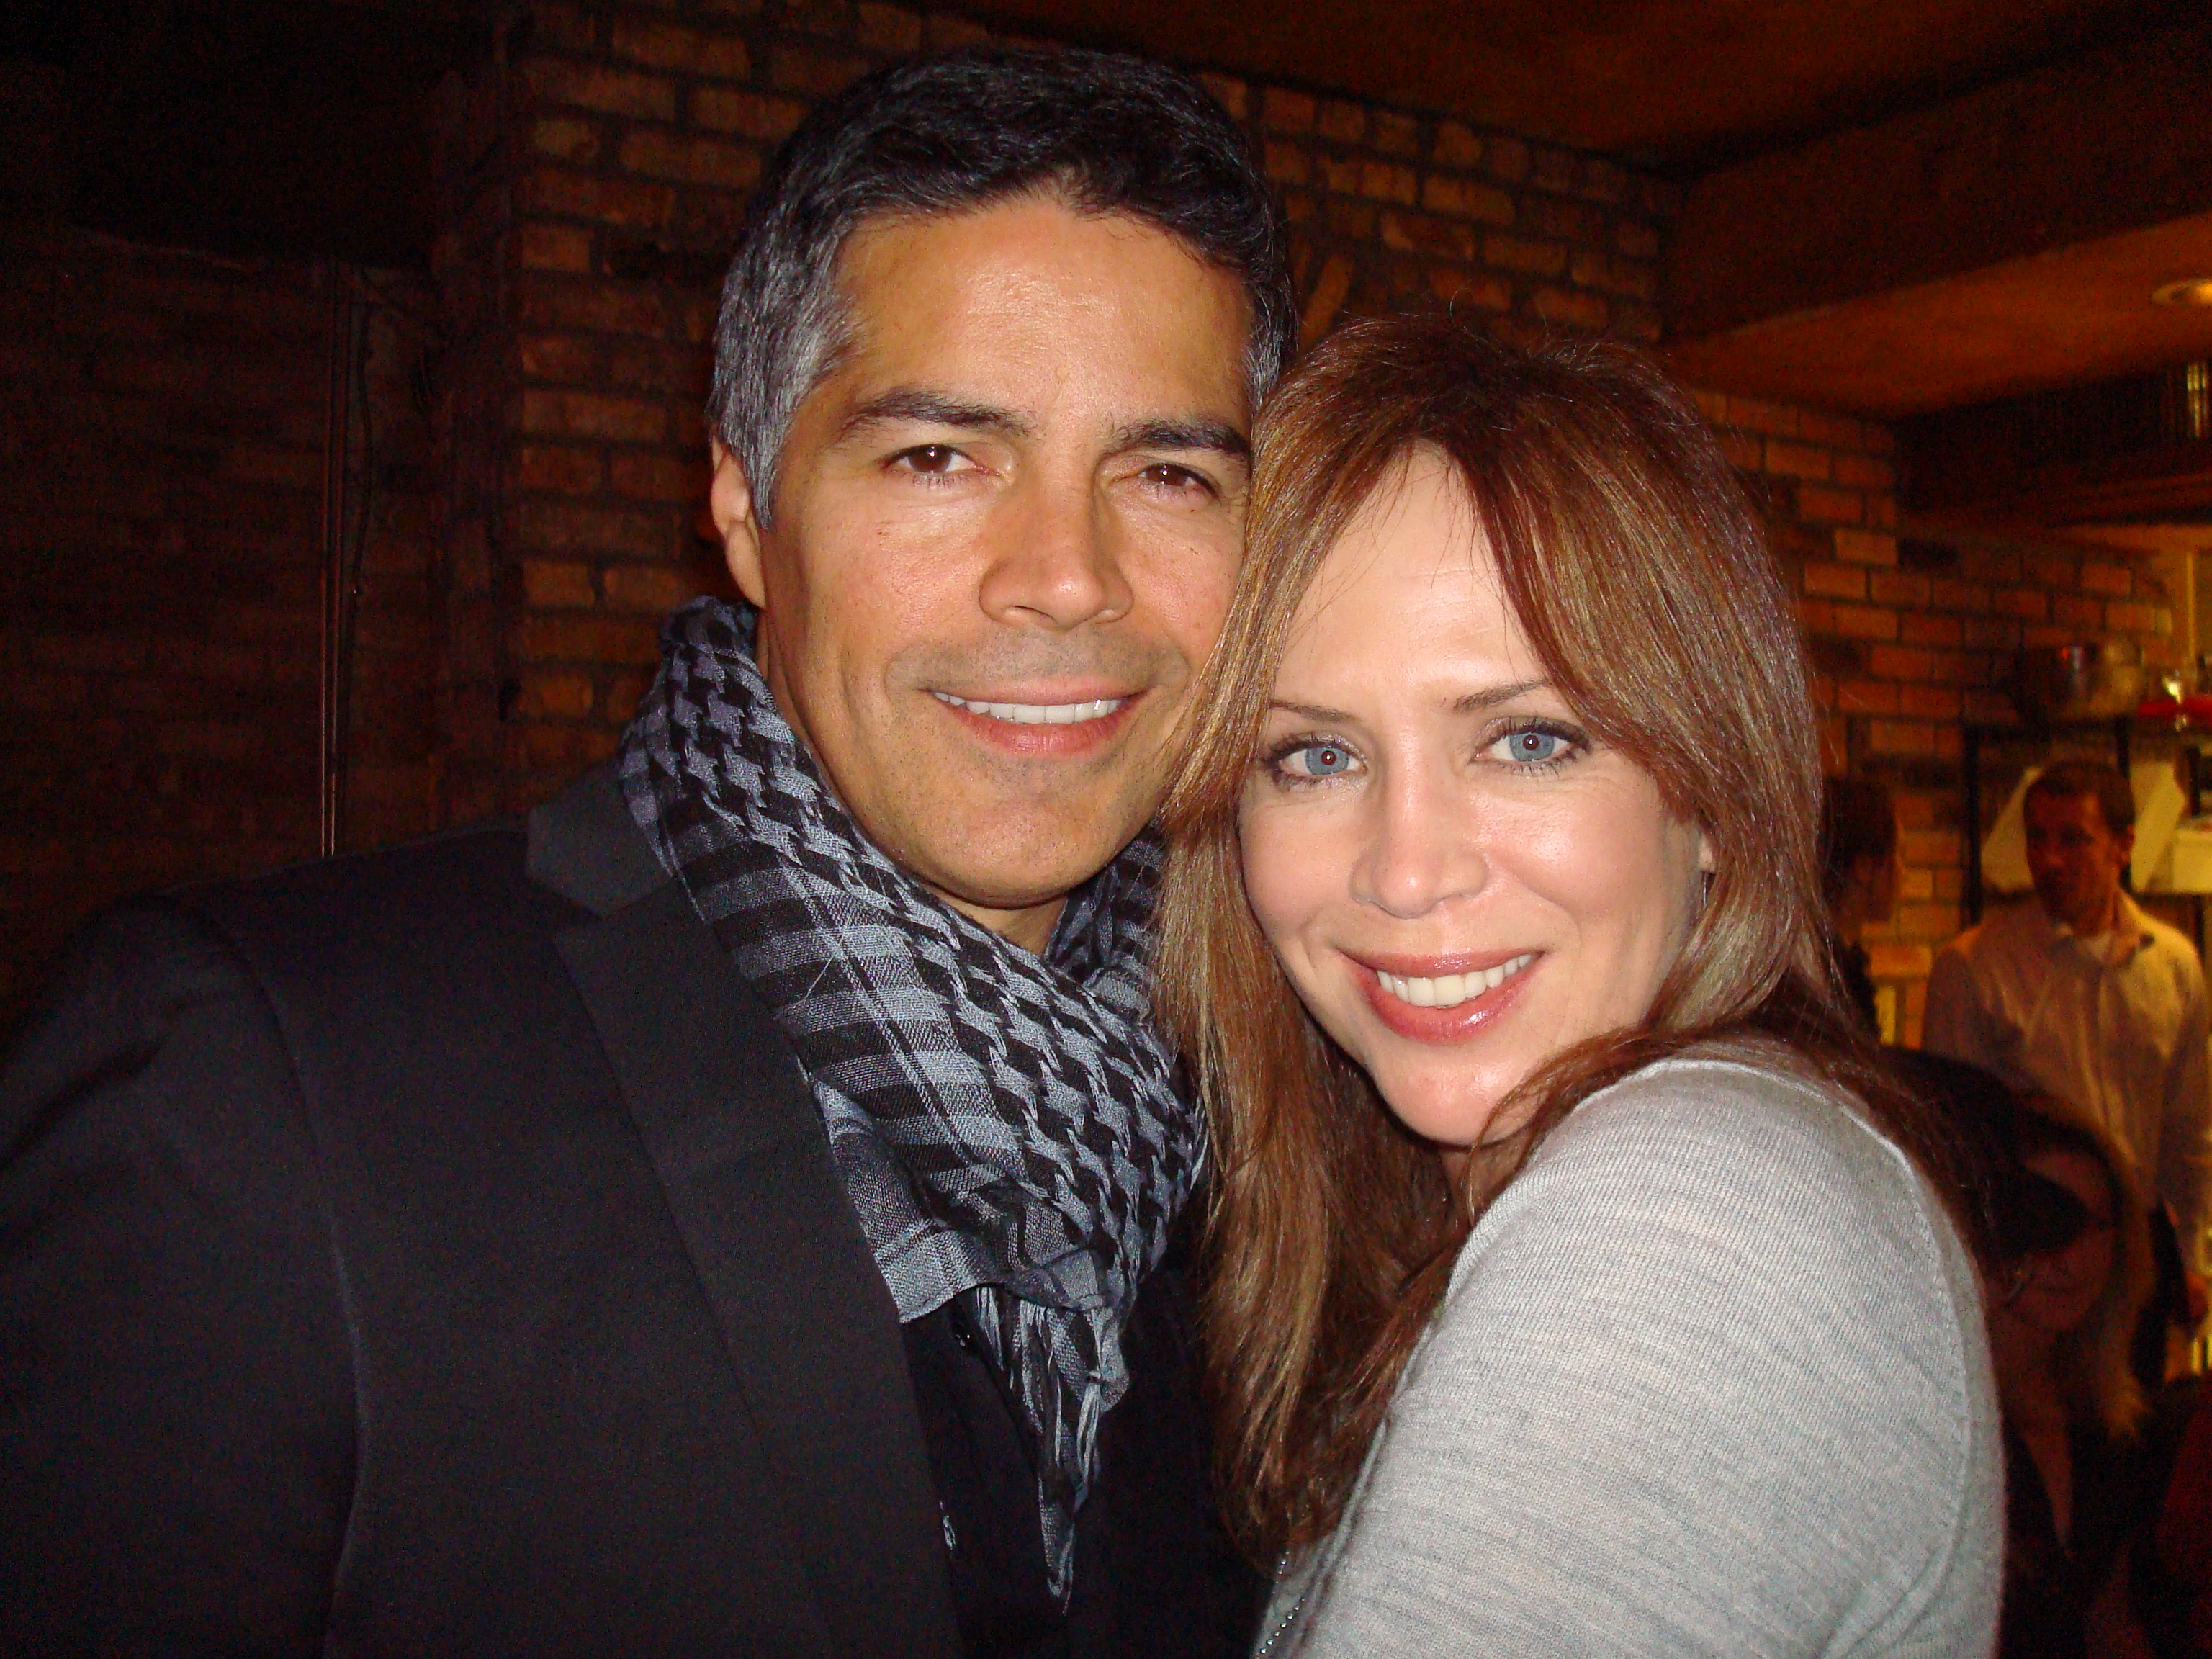 Esai Morales and Sherrie Rose at Sundance Film Festival 2011 event Chef Dance